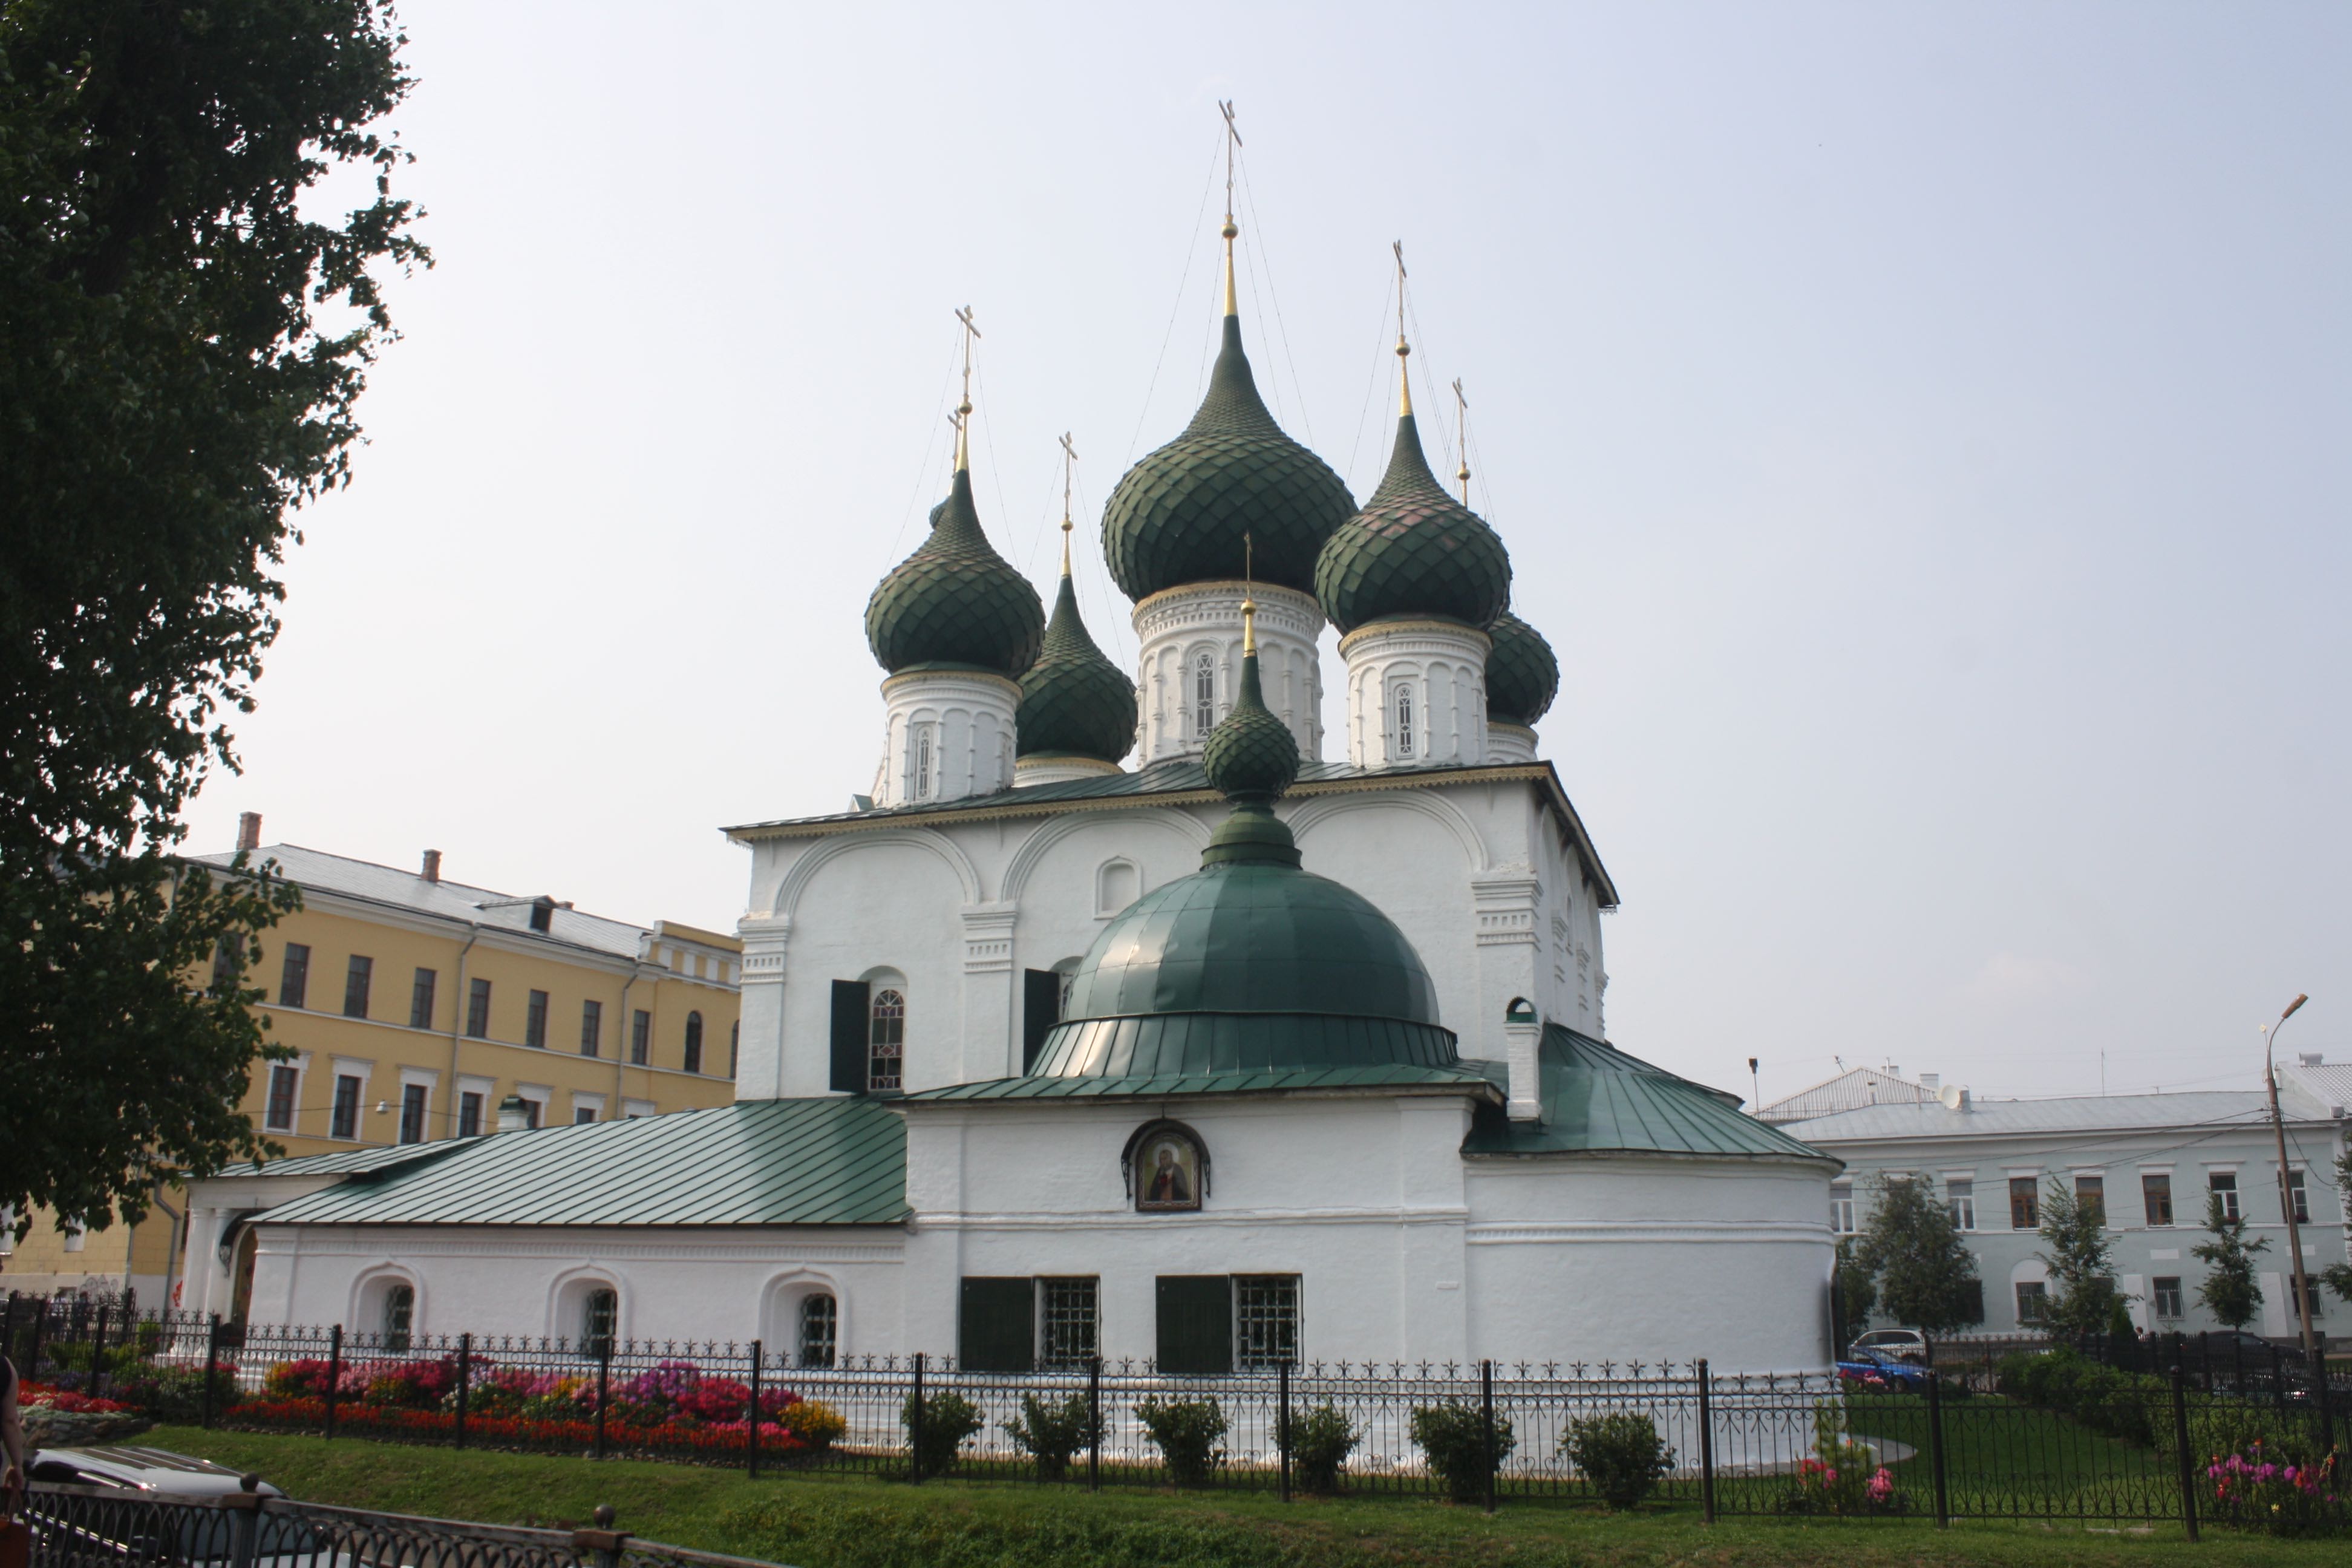 Many of the churches in the city have green domes. The well-preserved architecture is a main draw for film crews.